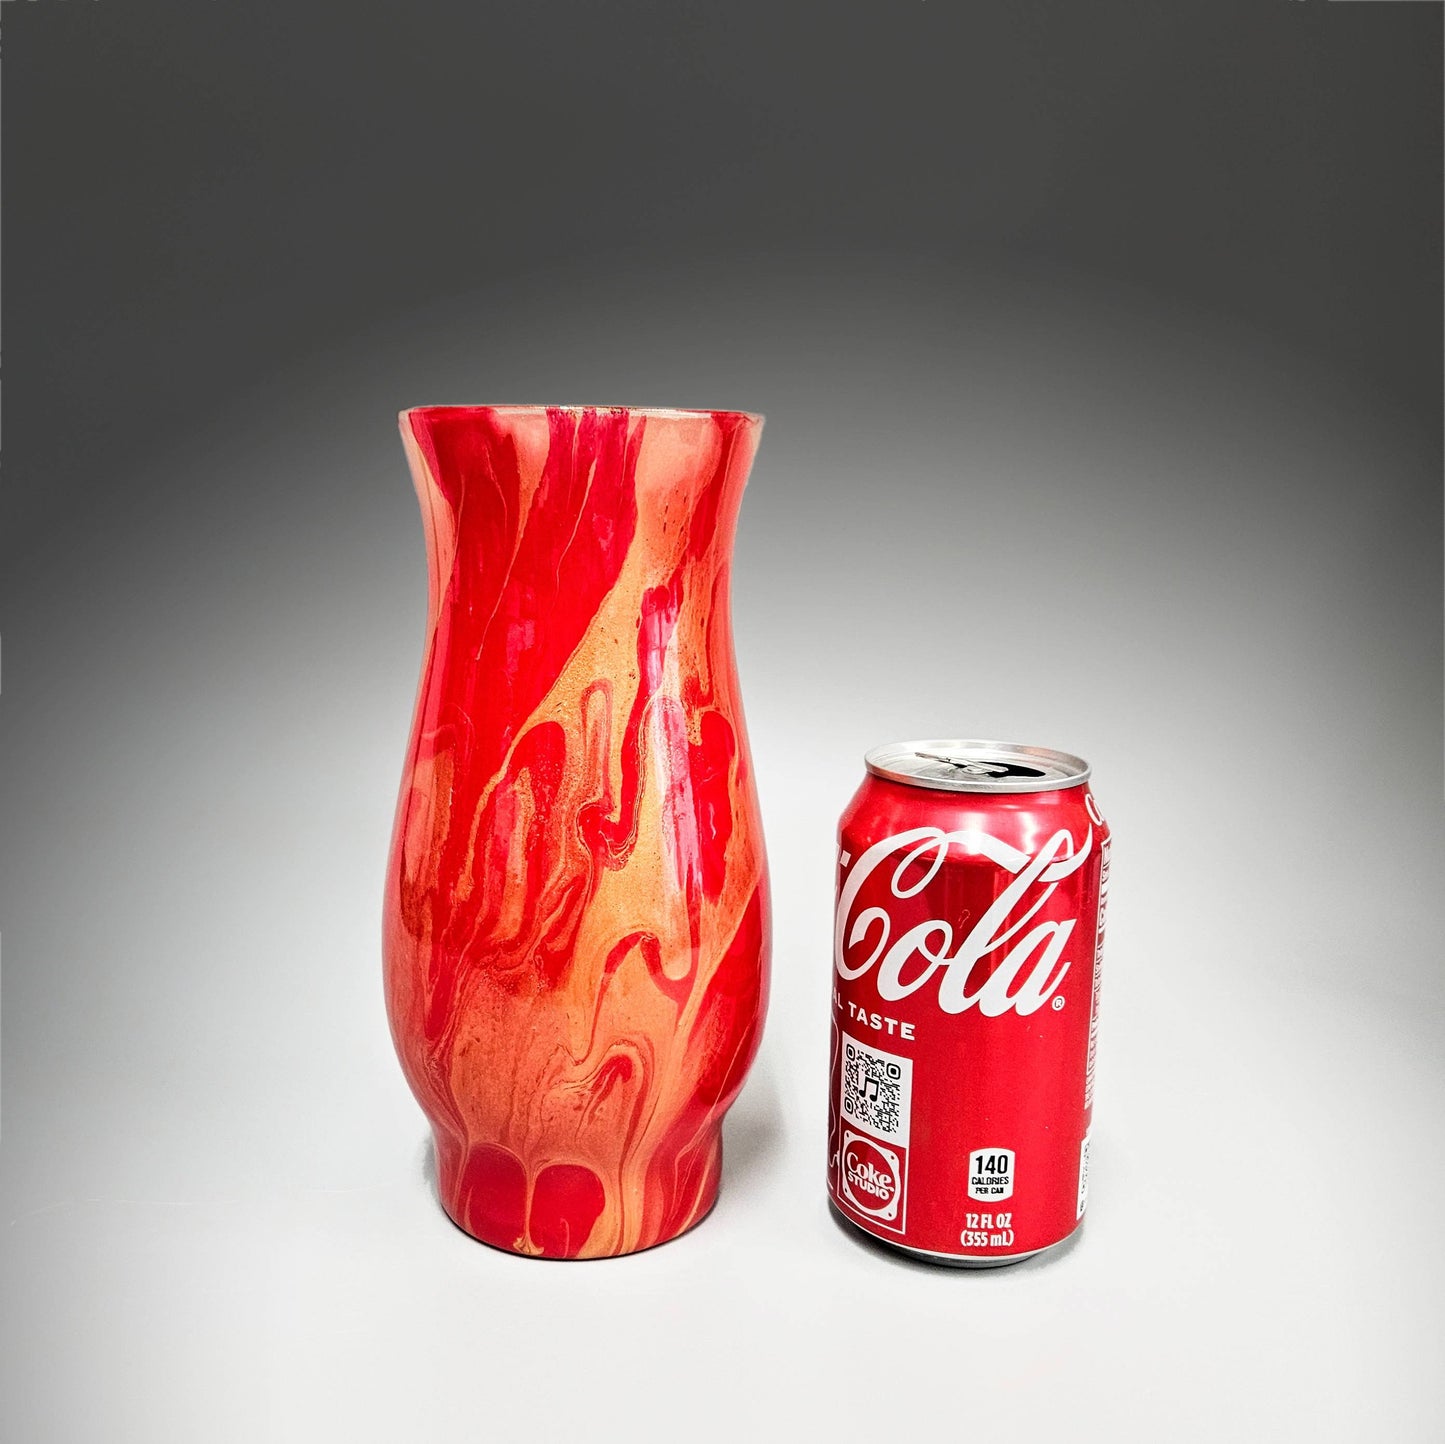 Painted Glass Vase in Red and Metallic Gold